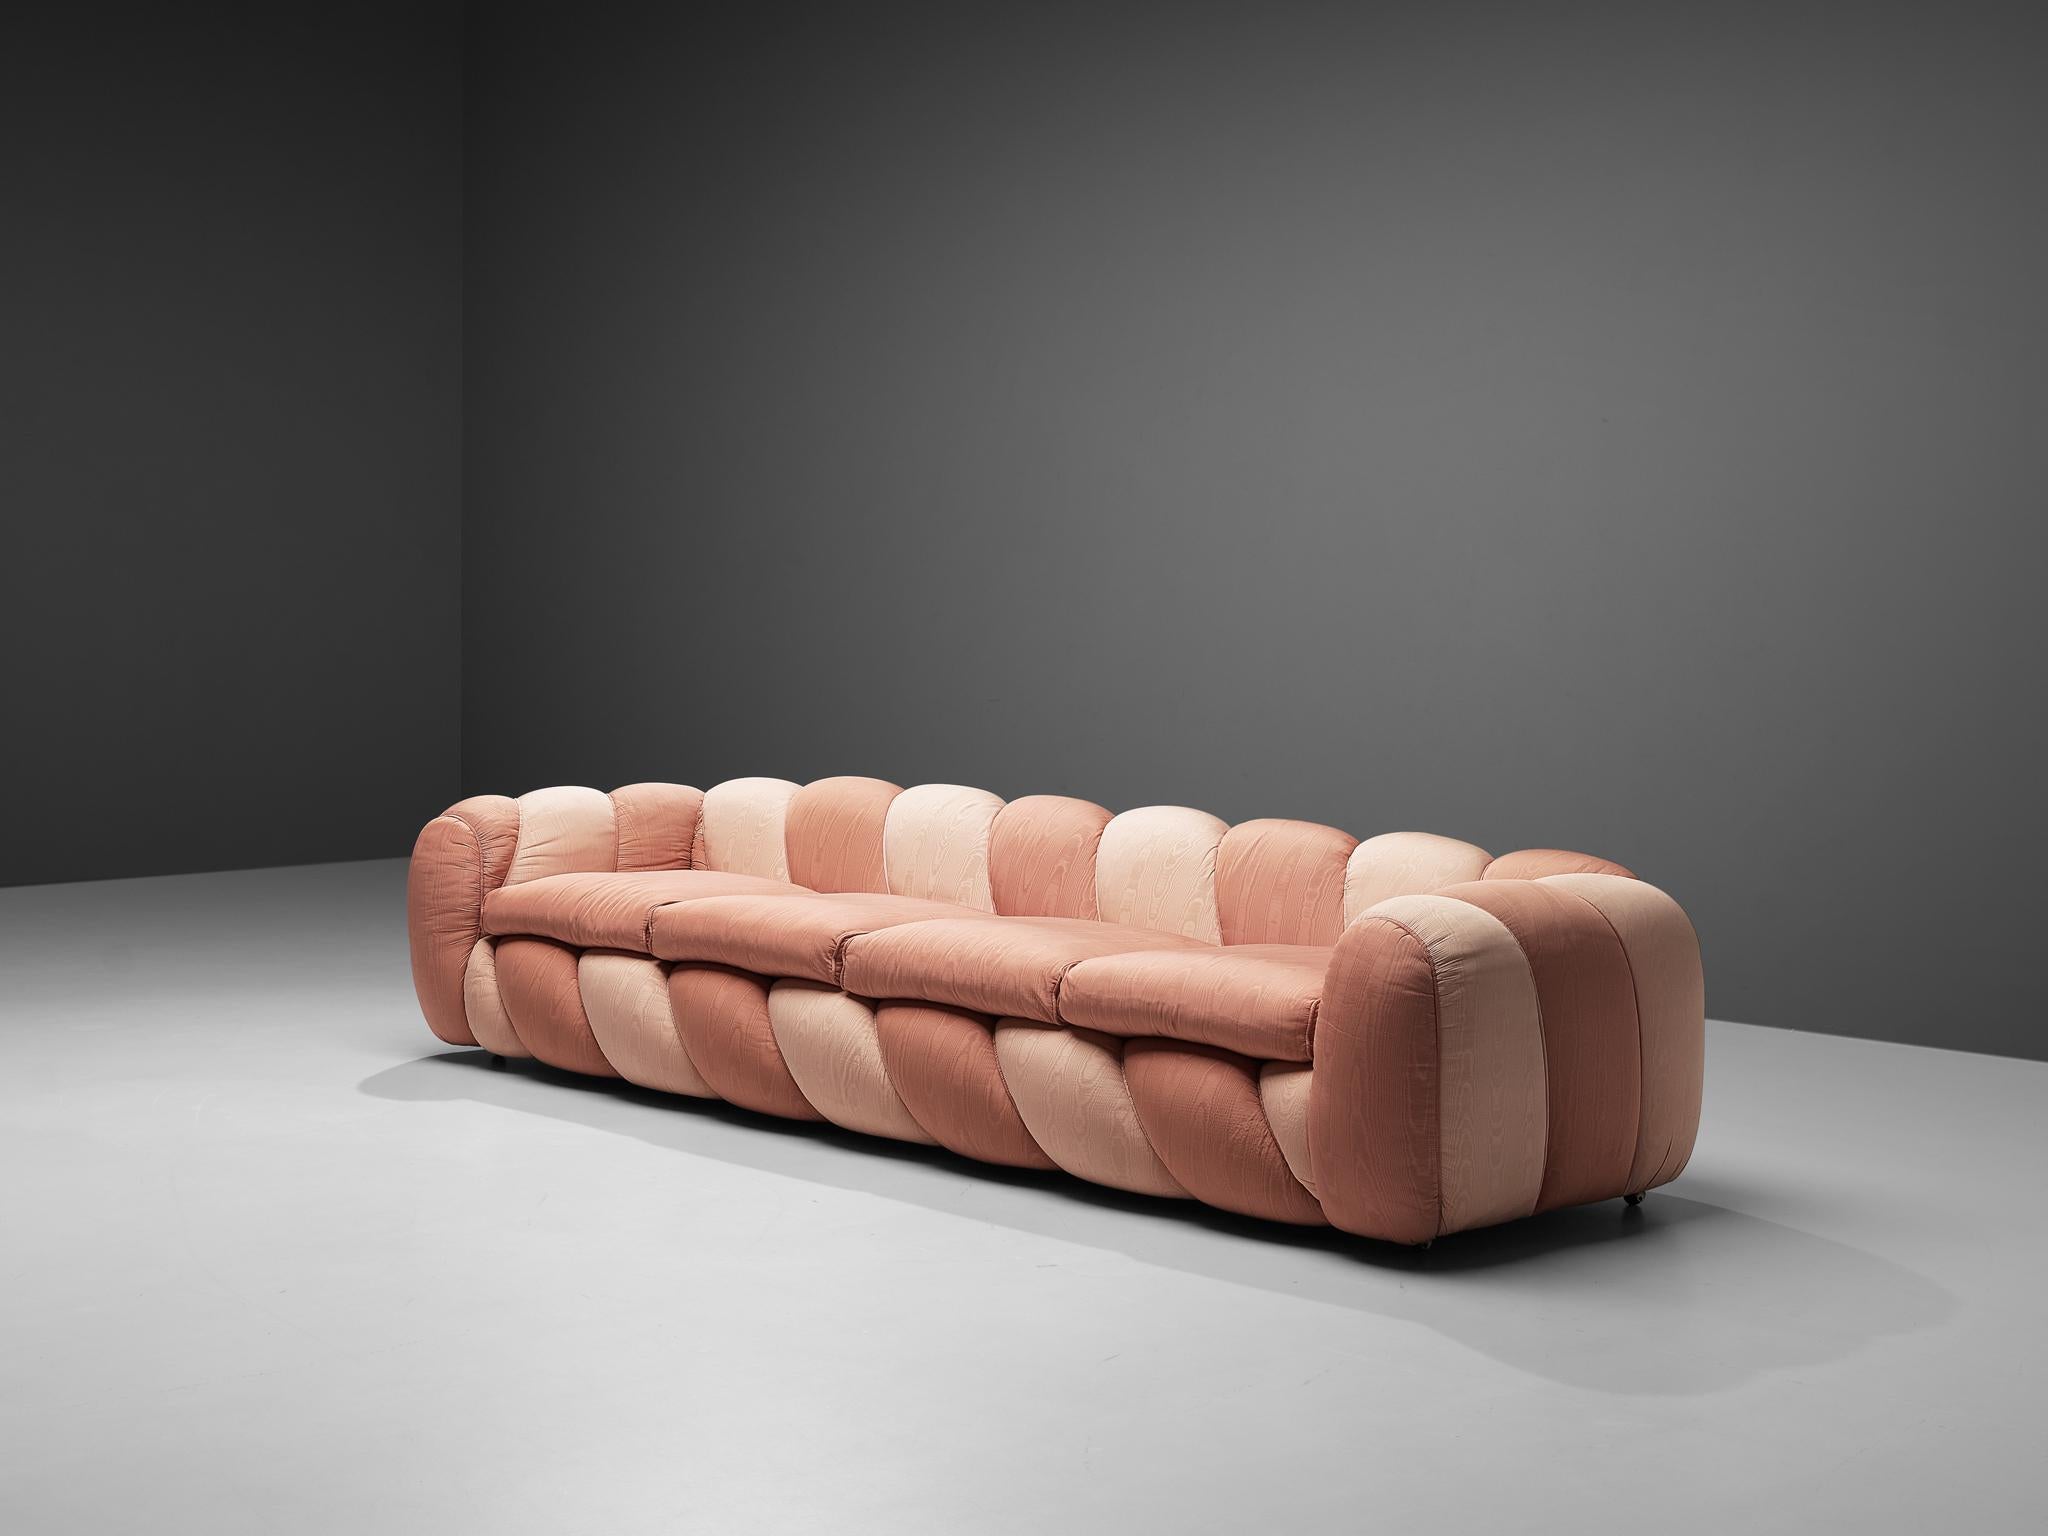 Italian Vivai del Sud Large Four Seat Sofa in Pink Fabric Upholstery